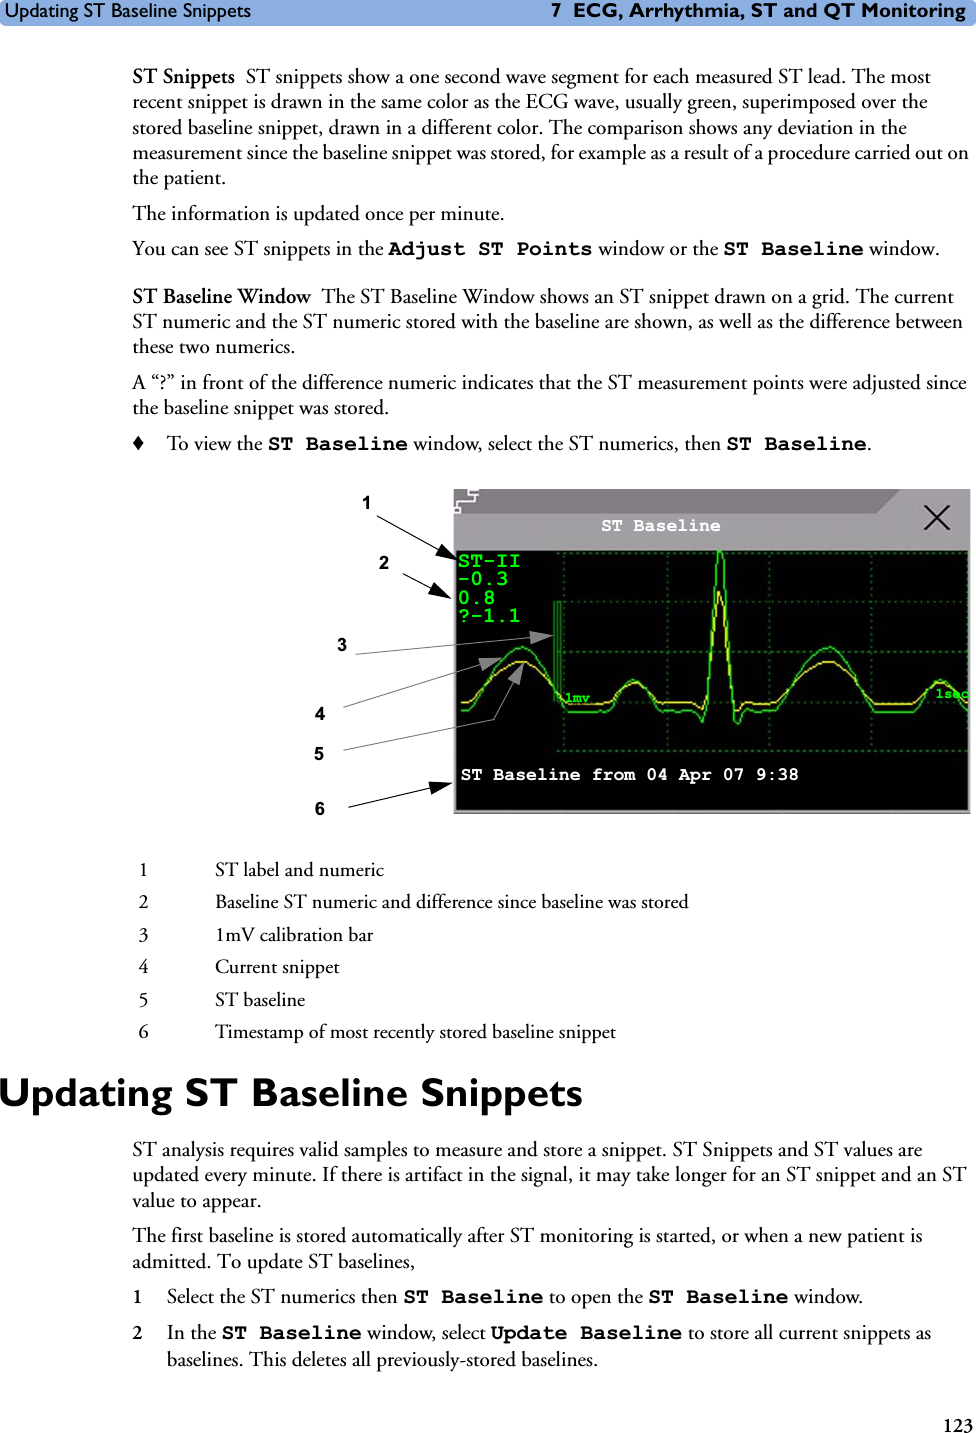 Updating ST Baseline Snippets 7 ECG, Arrhythmia, ST and QT Monitoring123ST Snippets ST snippets show a one second wave segment for each measured ST lead. The most recent snippet is drawn in the same color as the ECG wave, usually green, superimposed over the stored baseline snippet, drawn in a different color. The comparison shows any deviation in the measurement since the baseline snippet was stored, for example as a result of a procedure carried out on the patient.The information is updated once per minute. You can see ST snippets in the Adjust ST Points window or the ST Baseline window. ST Baseline Window The ST Baseline Window shows an ST snippet drawn on a grid. The current ST numeric and the ST numeric stored with the baseline are shown, as well as the difference between these two numerics. A “?” in front of the difference numeric indicates that the ST measurement points were adjusted since the baseline snippet was stored. ♦To v iew the ST Baseline window, select the ST numerics, then ST Baseline.Updating ST Baseline SnippetsST analysis requires valid samples to measure and store a snippet. ST Snippets and ST values are updated every minute. If there is artifact in the signal, it may take longer for an ST snippet and an ST value to appear. The first baseline is stored automatically after ST monitoring is started, or when a new patient is admitted. To update ST baselines,1Select the ST numerics then ST Baseline to open the ST Baseline window. 2In the ST Baseline window, select Update Baseline to store all current snippets as baselines. This deletes all previously-stored baselines.1 ST label and numeric2 Baseline ST numeric and difference since baseline was stored3 1mV calibration bar4Current snippet5ST baseline6 Timestamp of most recently stored baseline snippet1ST Baseline from 04 Apr 07 9:386 ST Baseline3452ST-II-0.30.8?-1.11mv 1sec